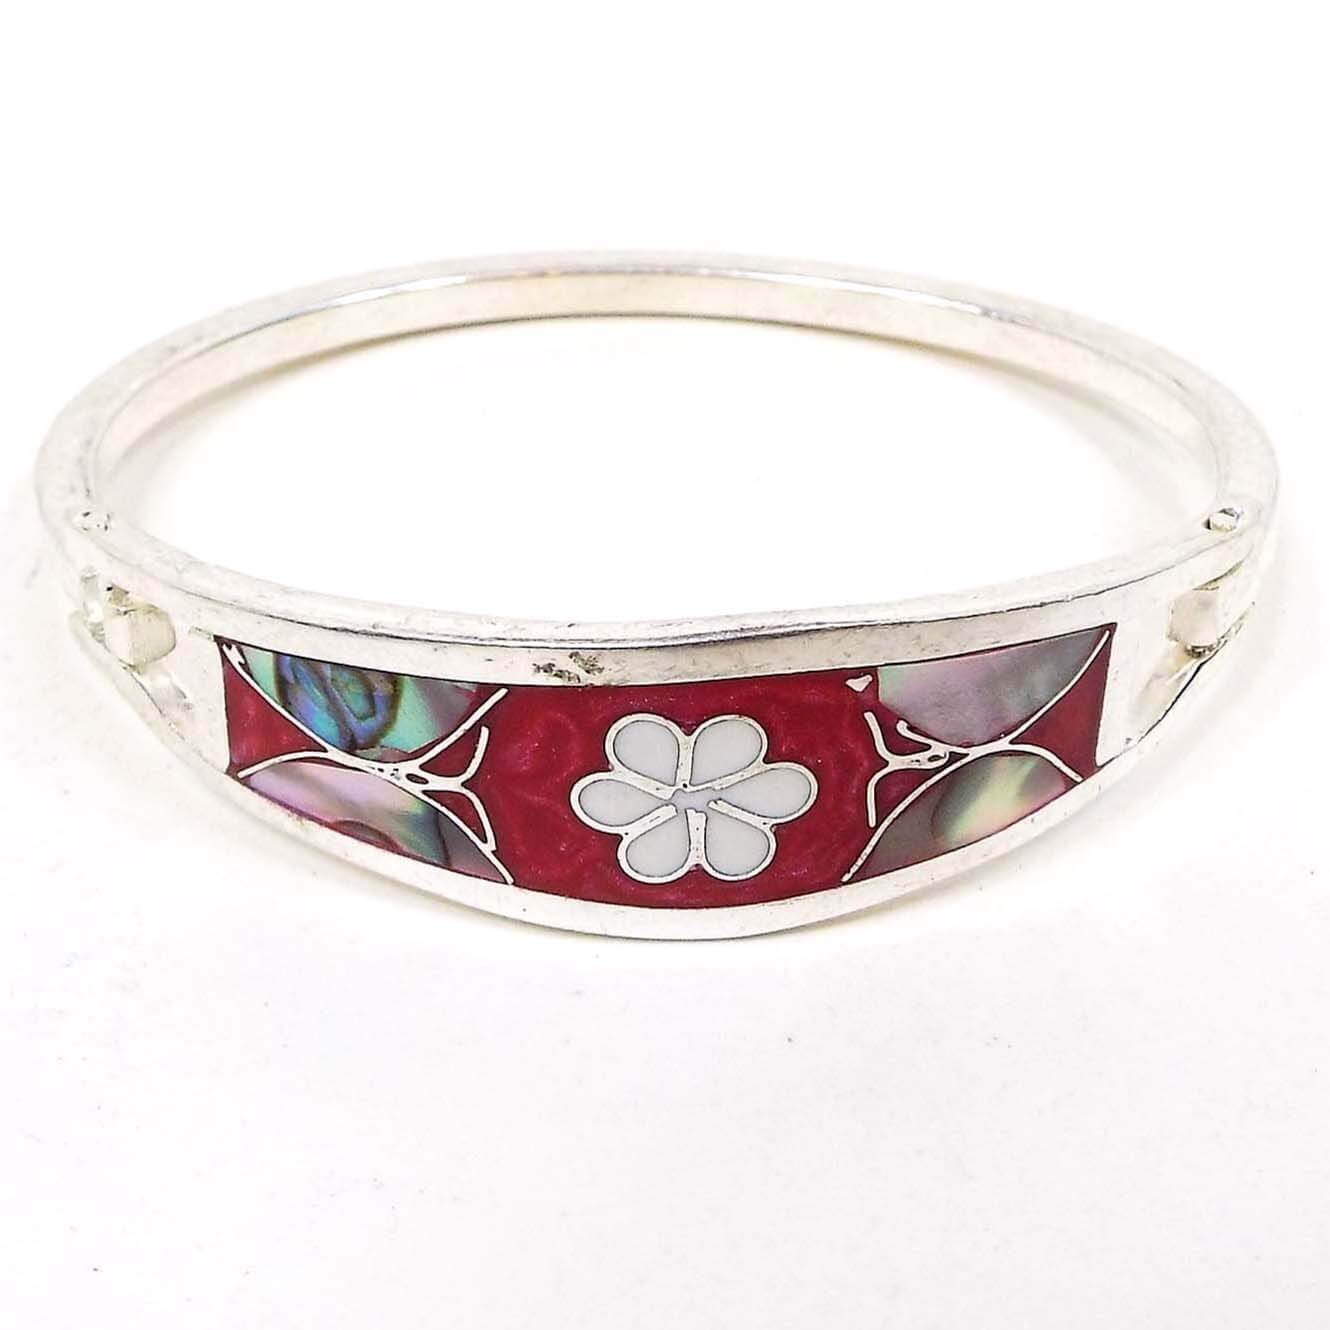 Angled front view of the Mexican butterfly and flower hinged bangle bracelet. The metal is silver tone in color. The front has pearly dark pink enamel with a white enamel flower in the middle and an abalone shell butterfly on each side. 